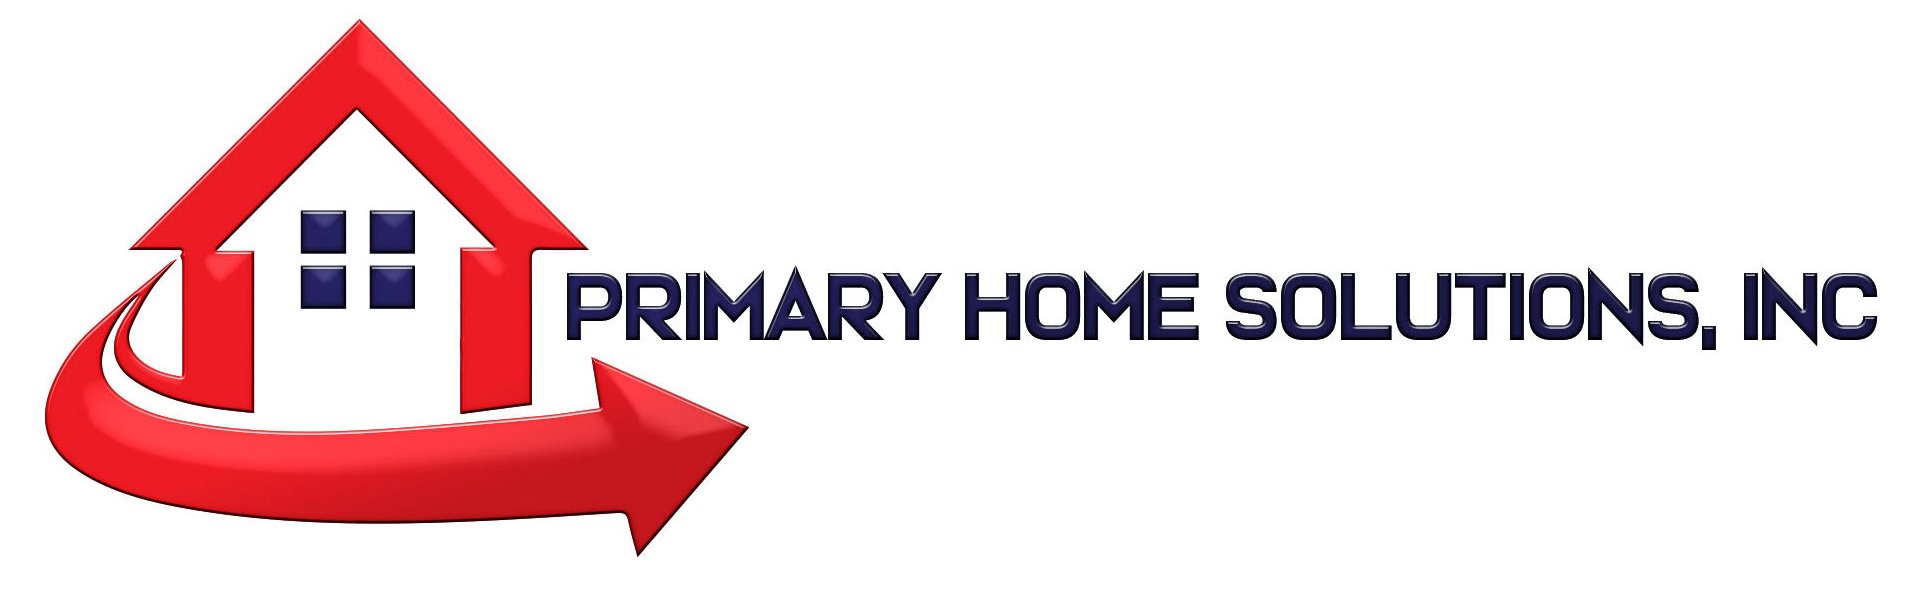 Primary Home Solutions logo